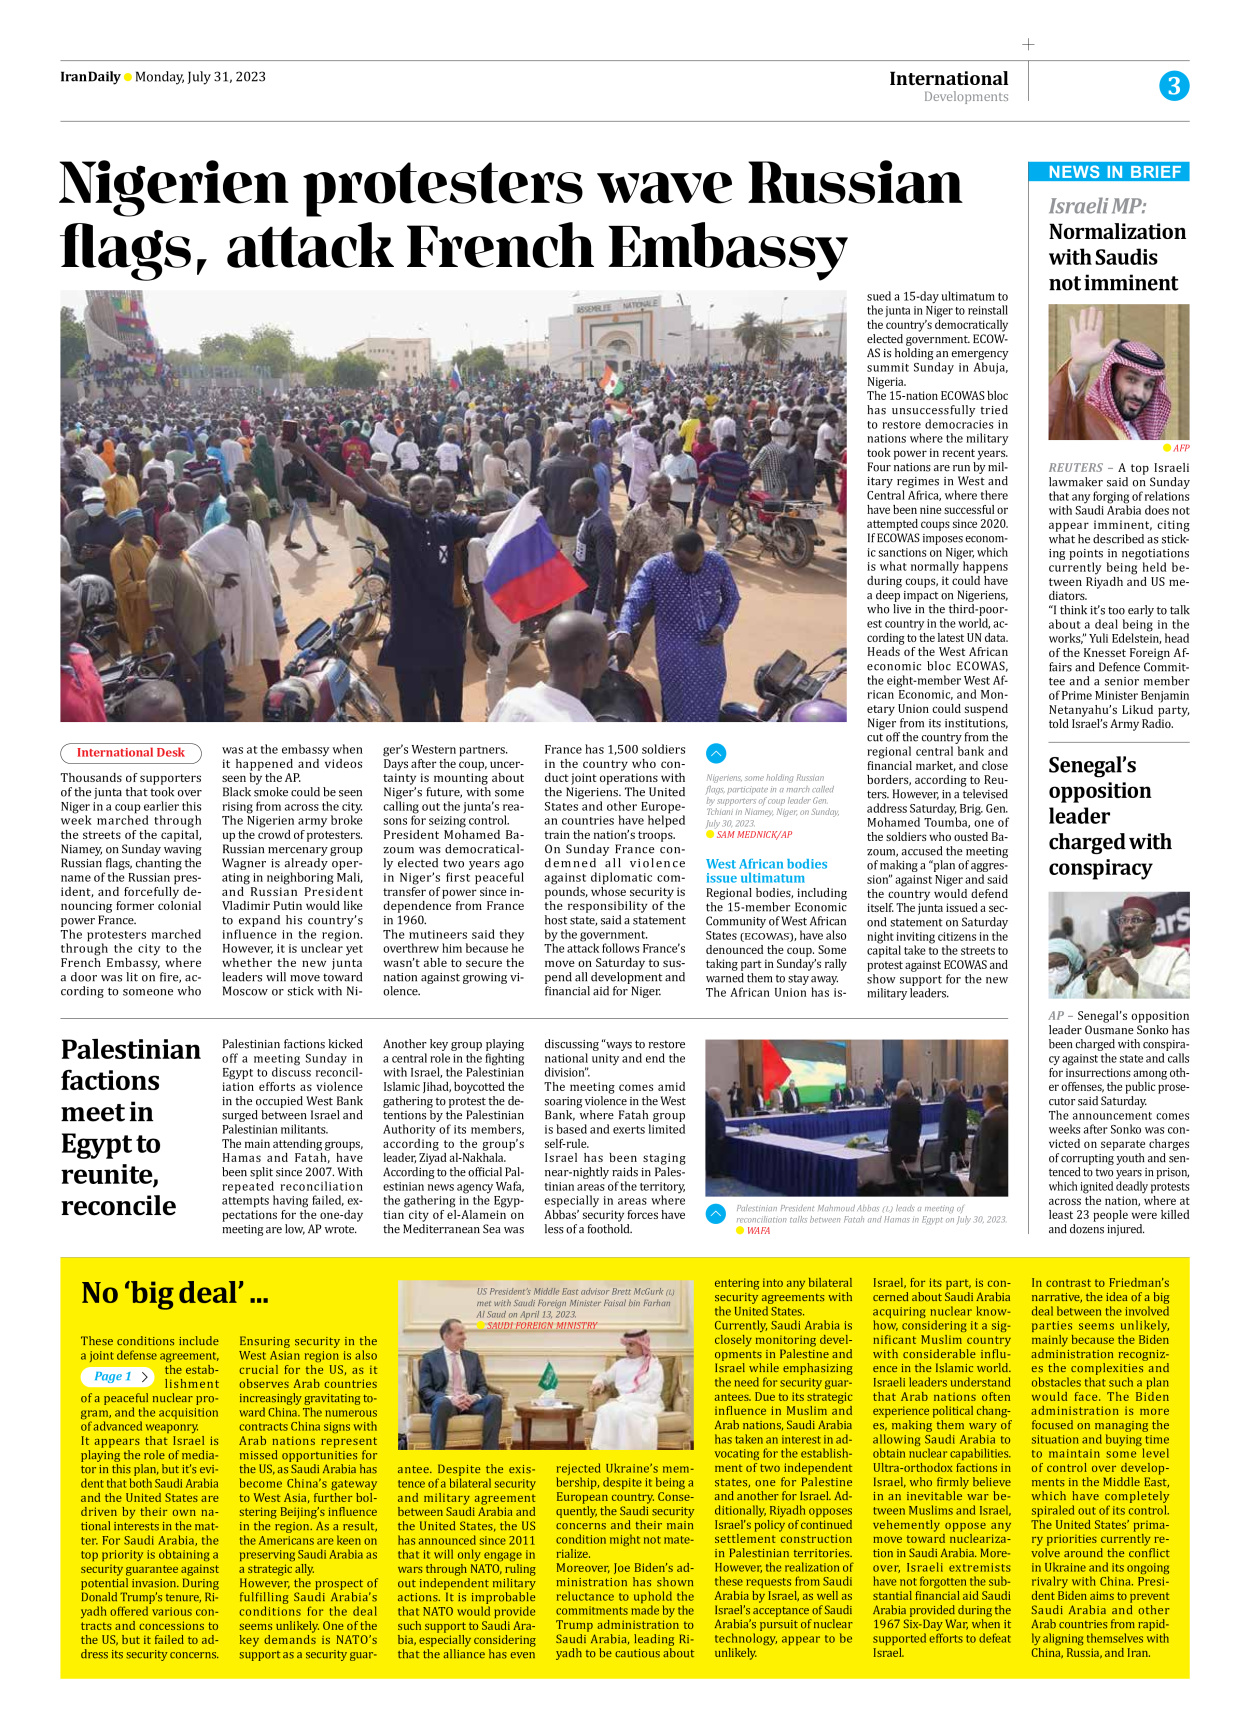 Iran Daily - Number Seven Thousand Three Hundred and Fifty Two - 31 July 2023 - Page 3